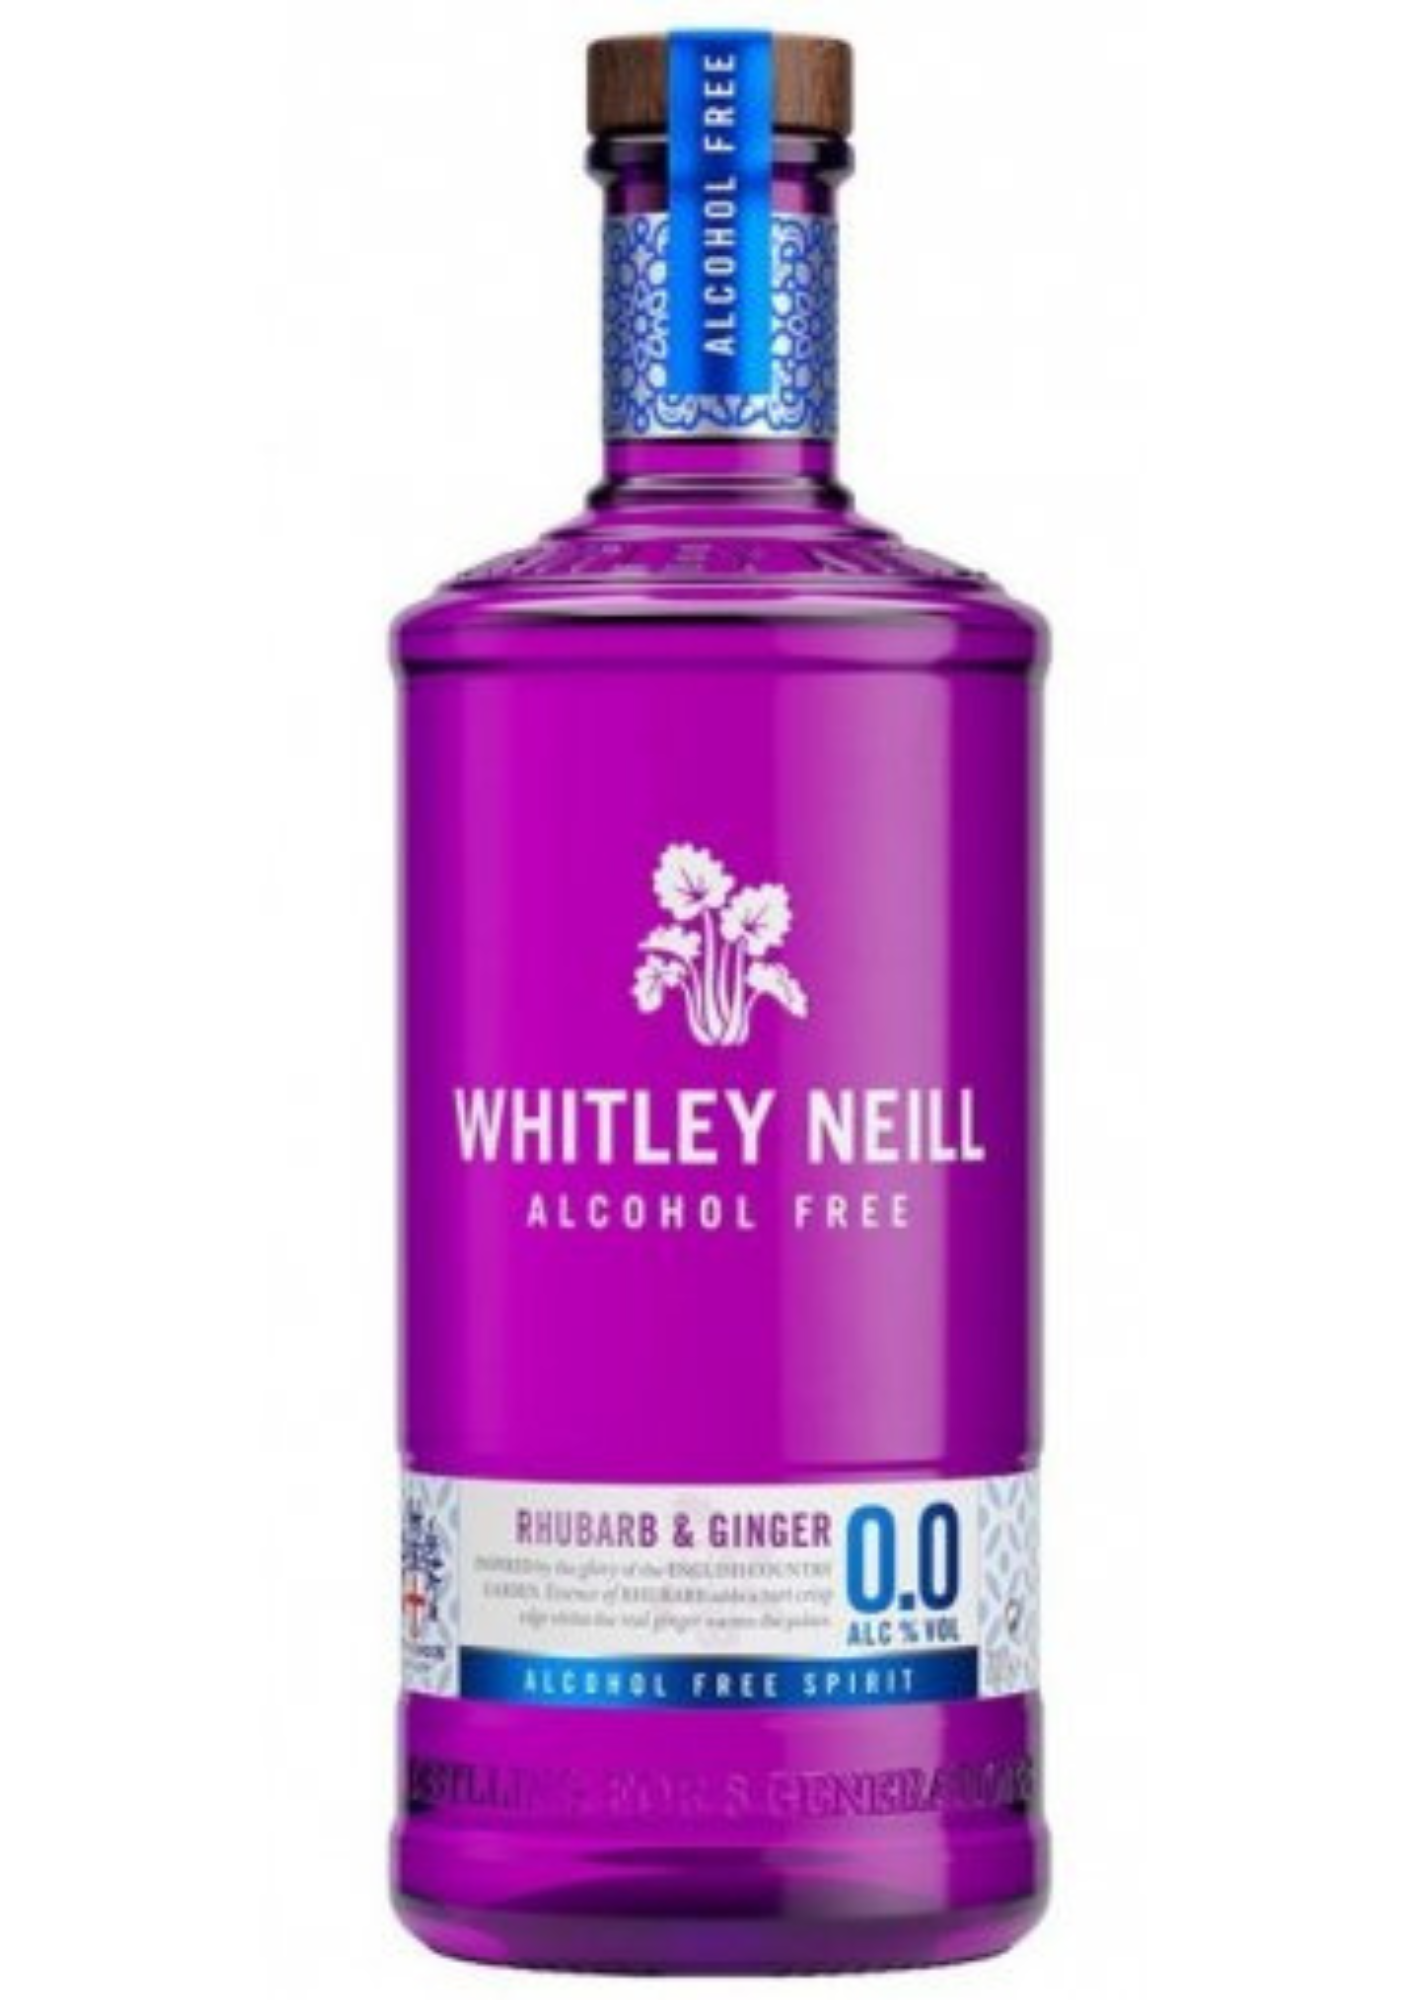 Whitley Neill Alcohol Free Rhubarb & Ginger